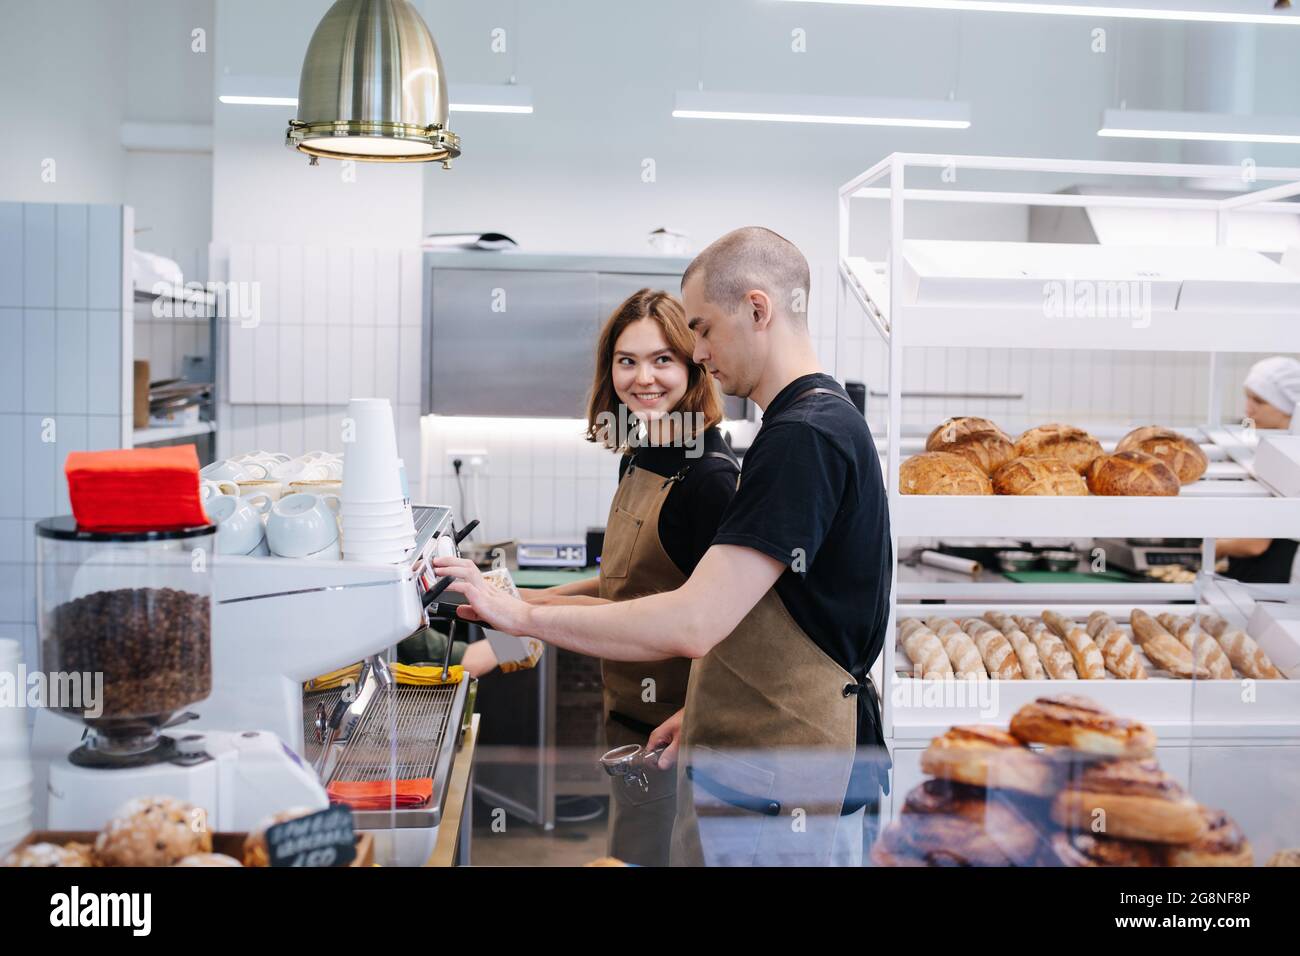 Coworkers, young man and woman socialising in the bakery kitchen. Side view. She's smiling at him. Stock Photo